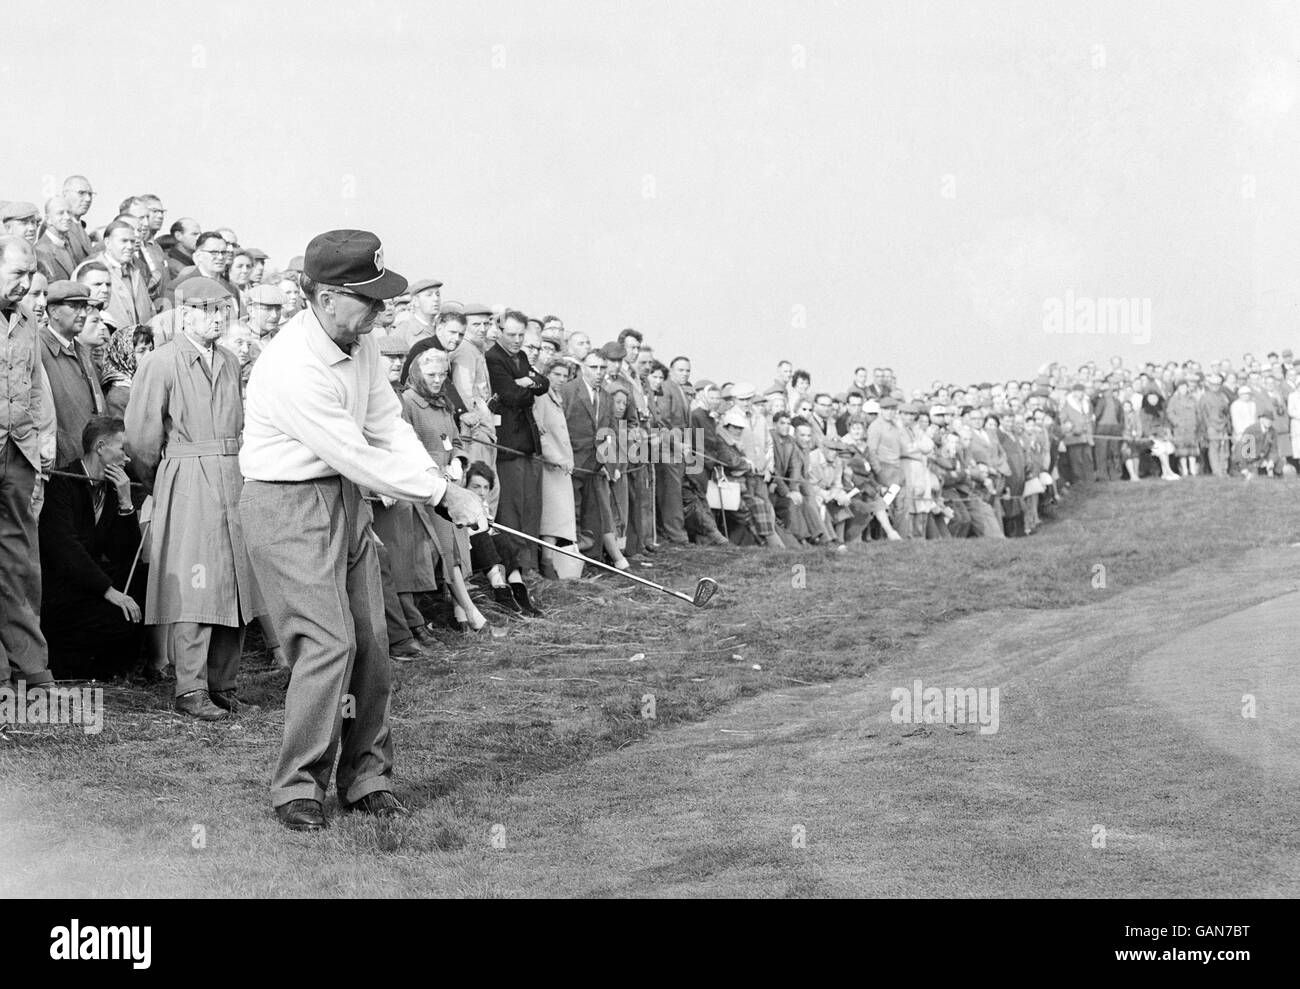 Golf - Ryder Cup - Great Britain and Ireland v USA - Royal Lytham and St Annes Stock Photo